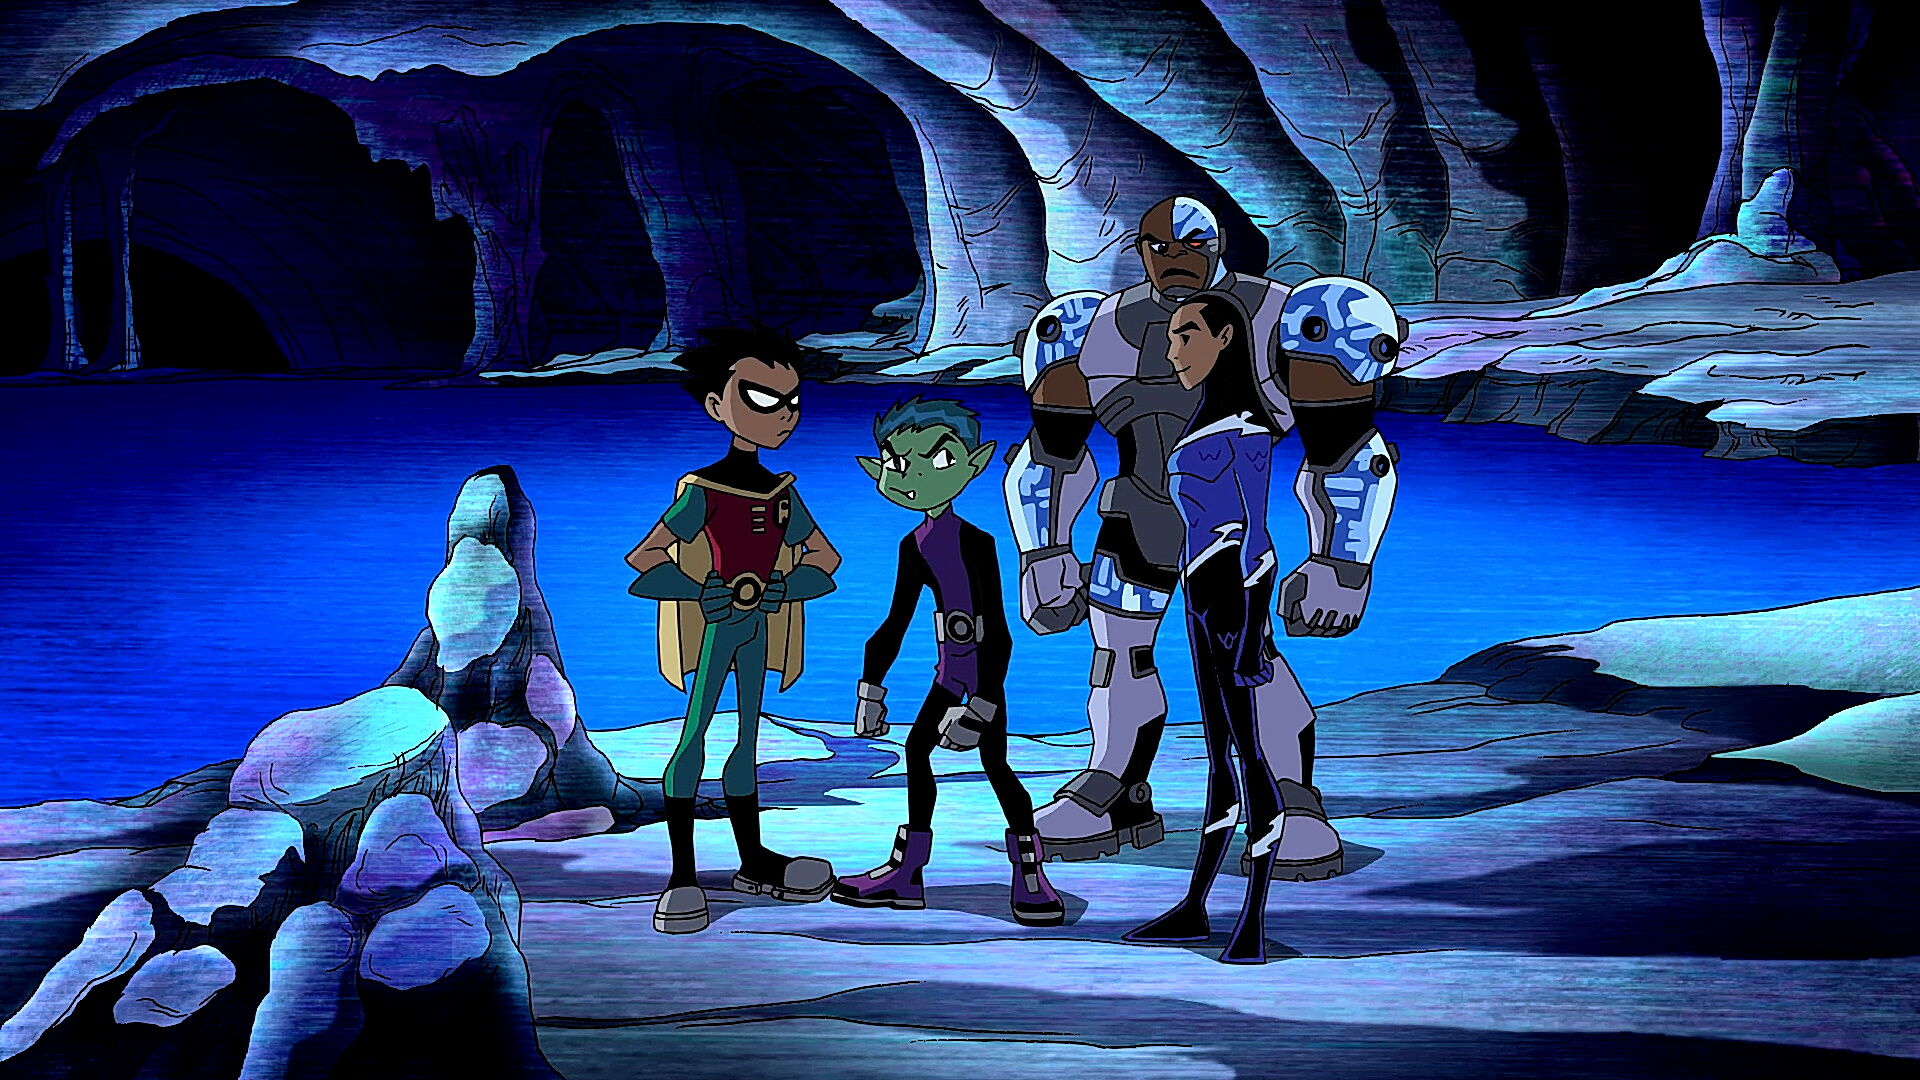 Six Animated Depictions - Teen Titans 3-4 by AdrenalineRush1996 on